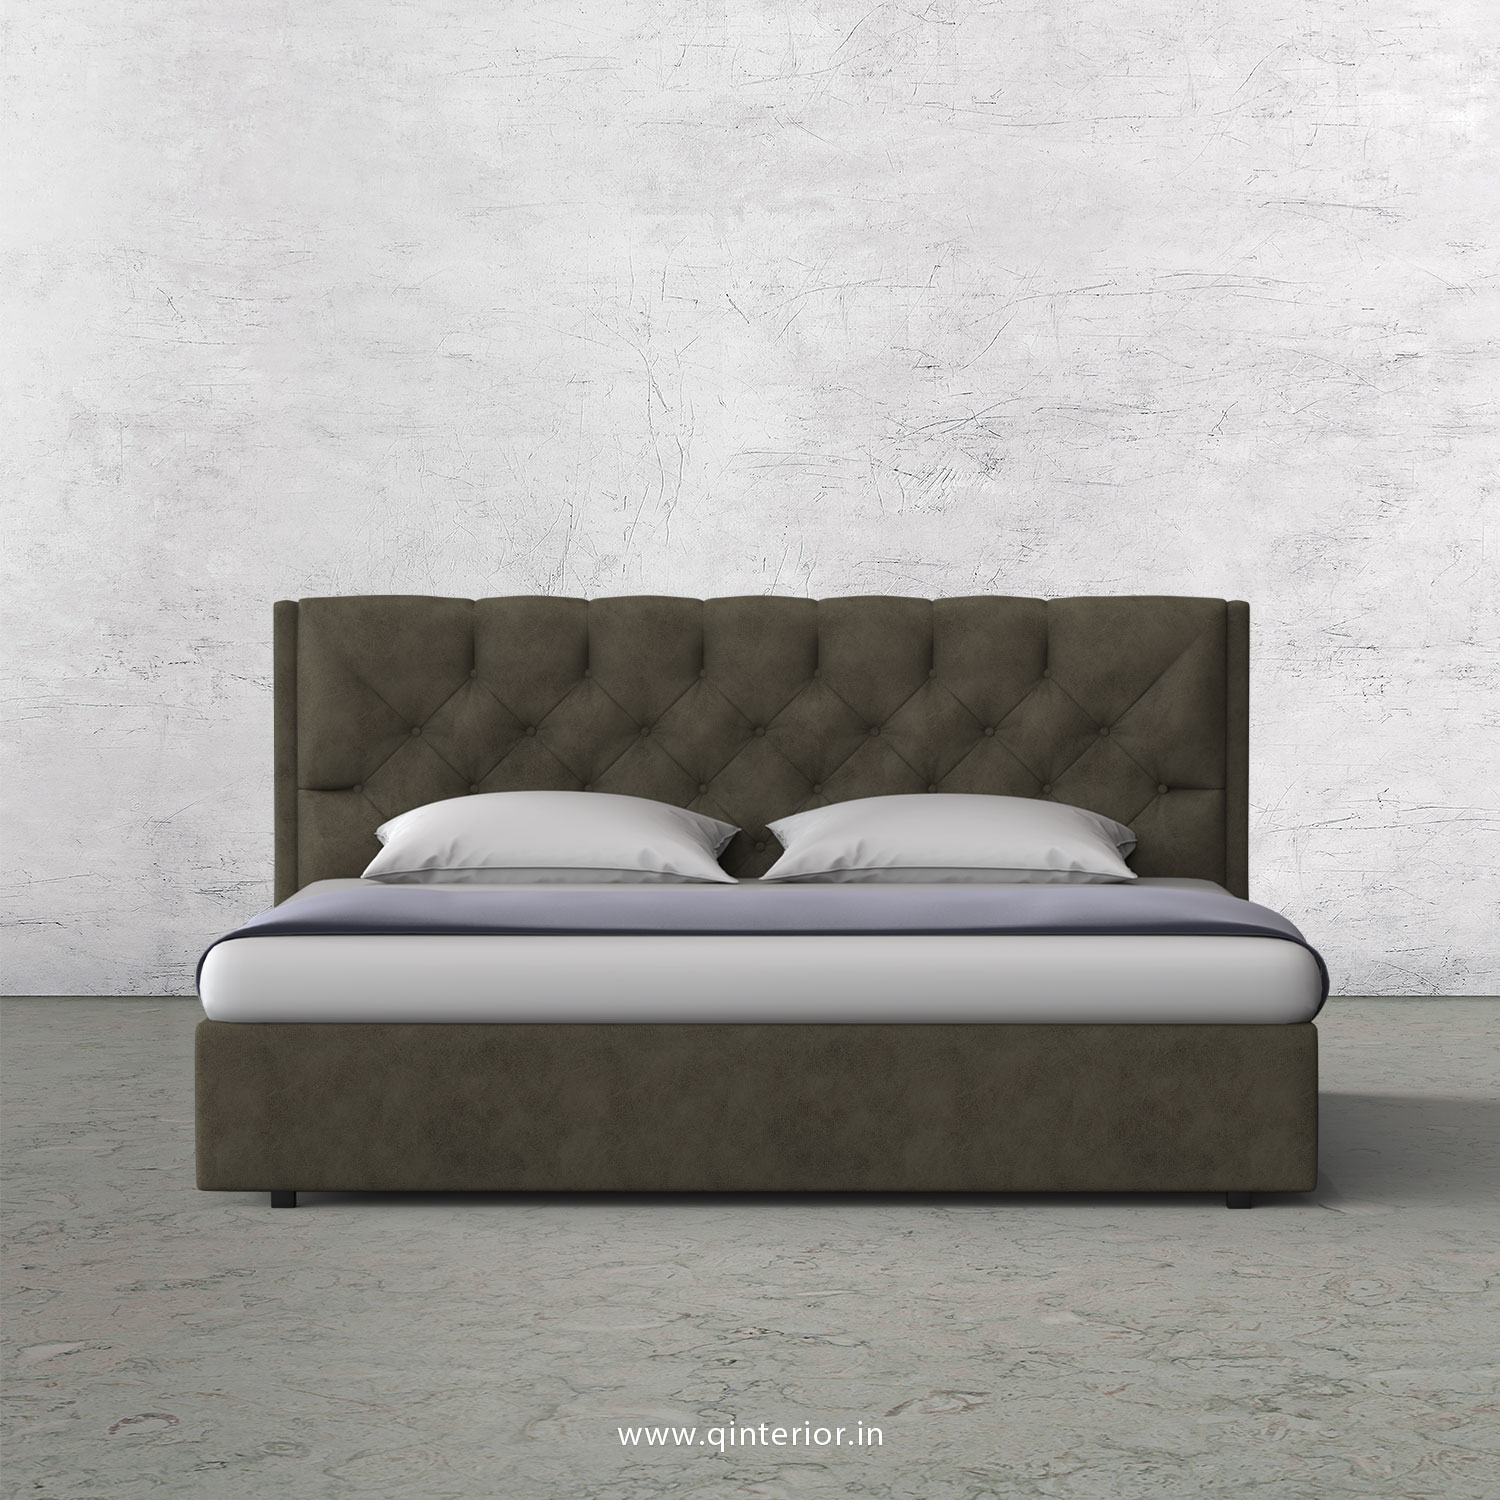 Scorpius King Size Bed in Fab Leather Fabric - KBD009 FL03